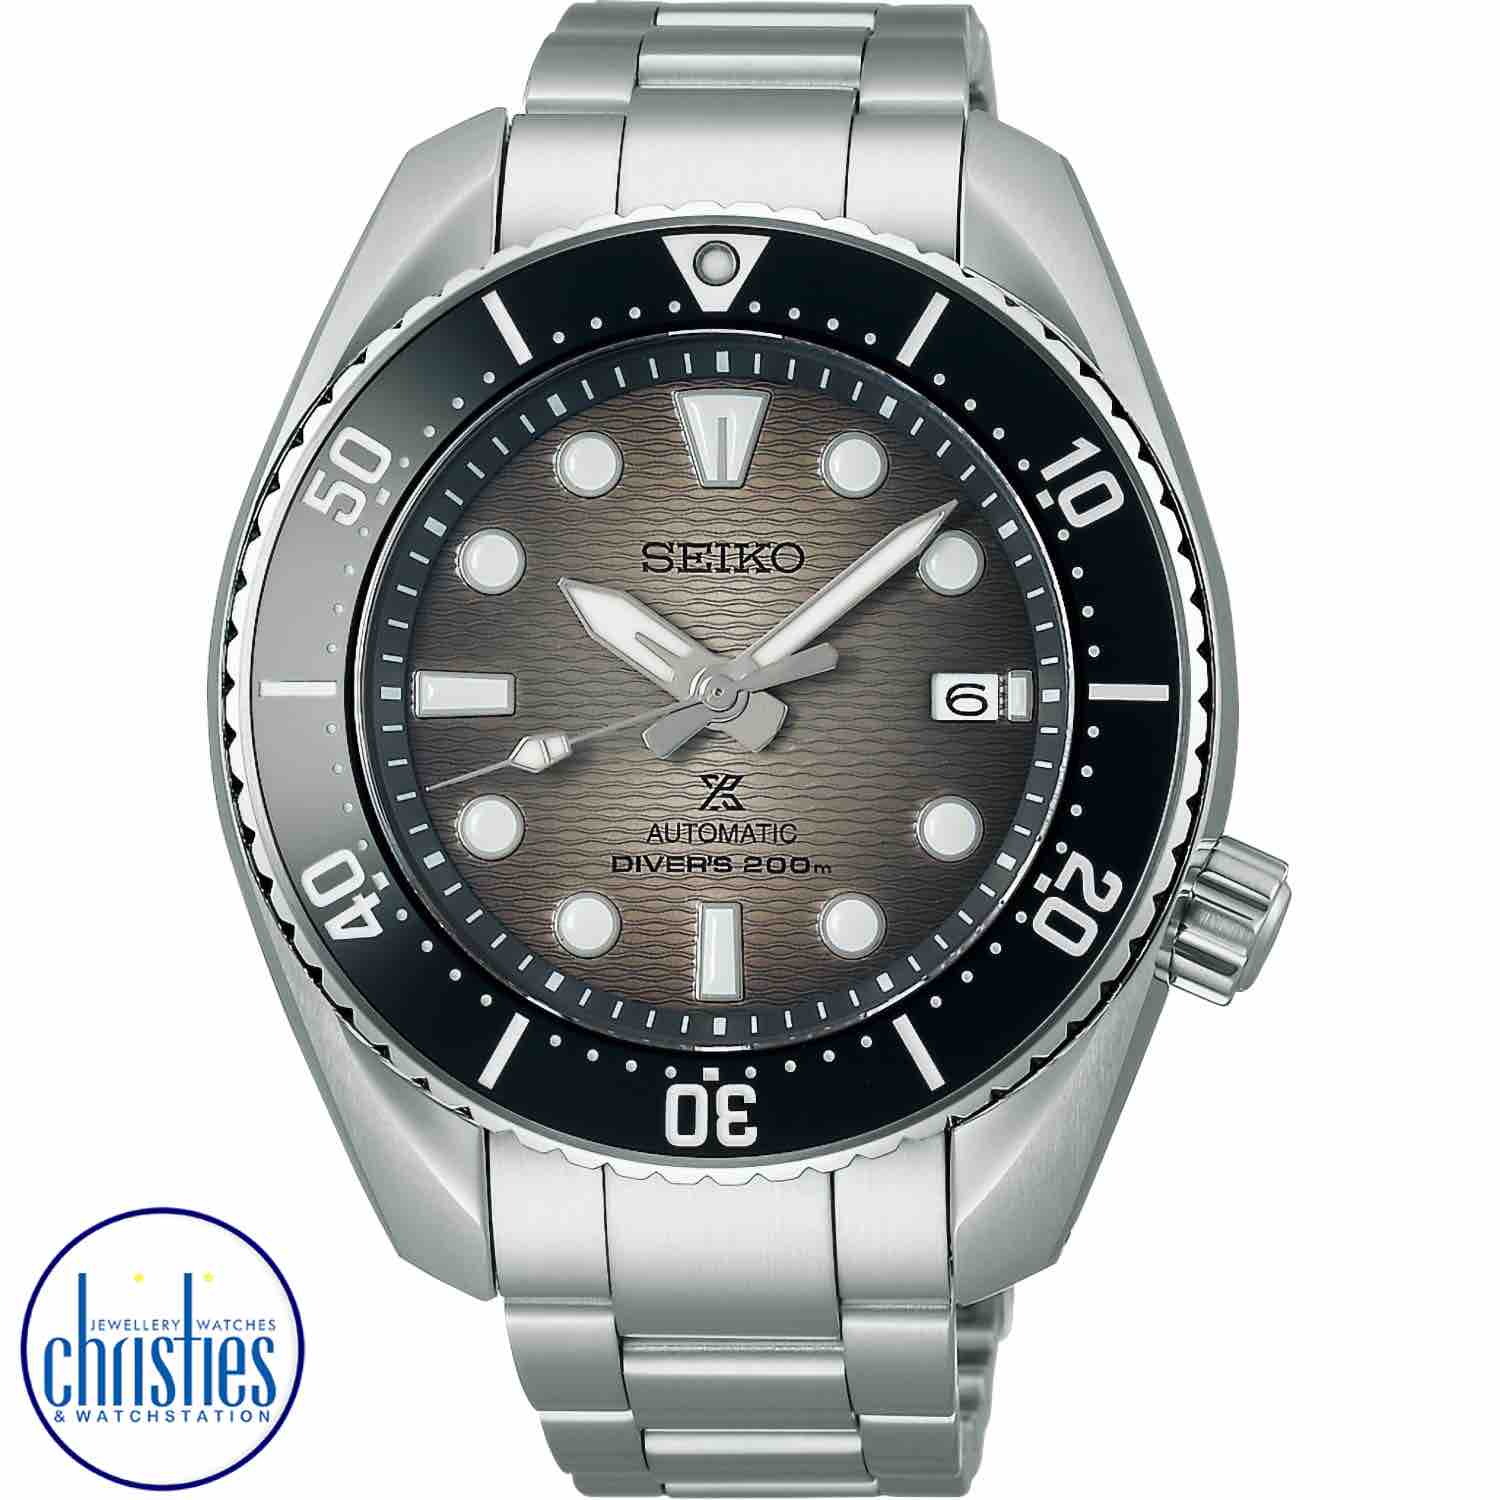 SPB323J Seiko Prospex King Sumo Automatic Divers Watch. Preorder now for September delivery - Save $100 on pre-orders until 31 Aug 2022 with coupon code "SUMO2022"The Seiko Sumo has enjoyed a strong cult following since 2007 for a good reason.